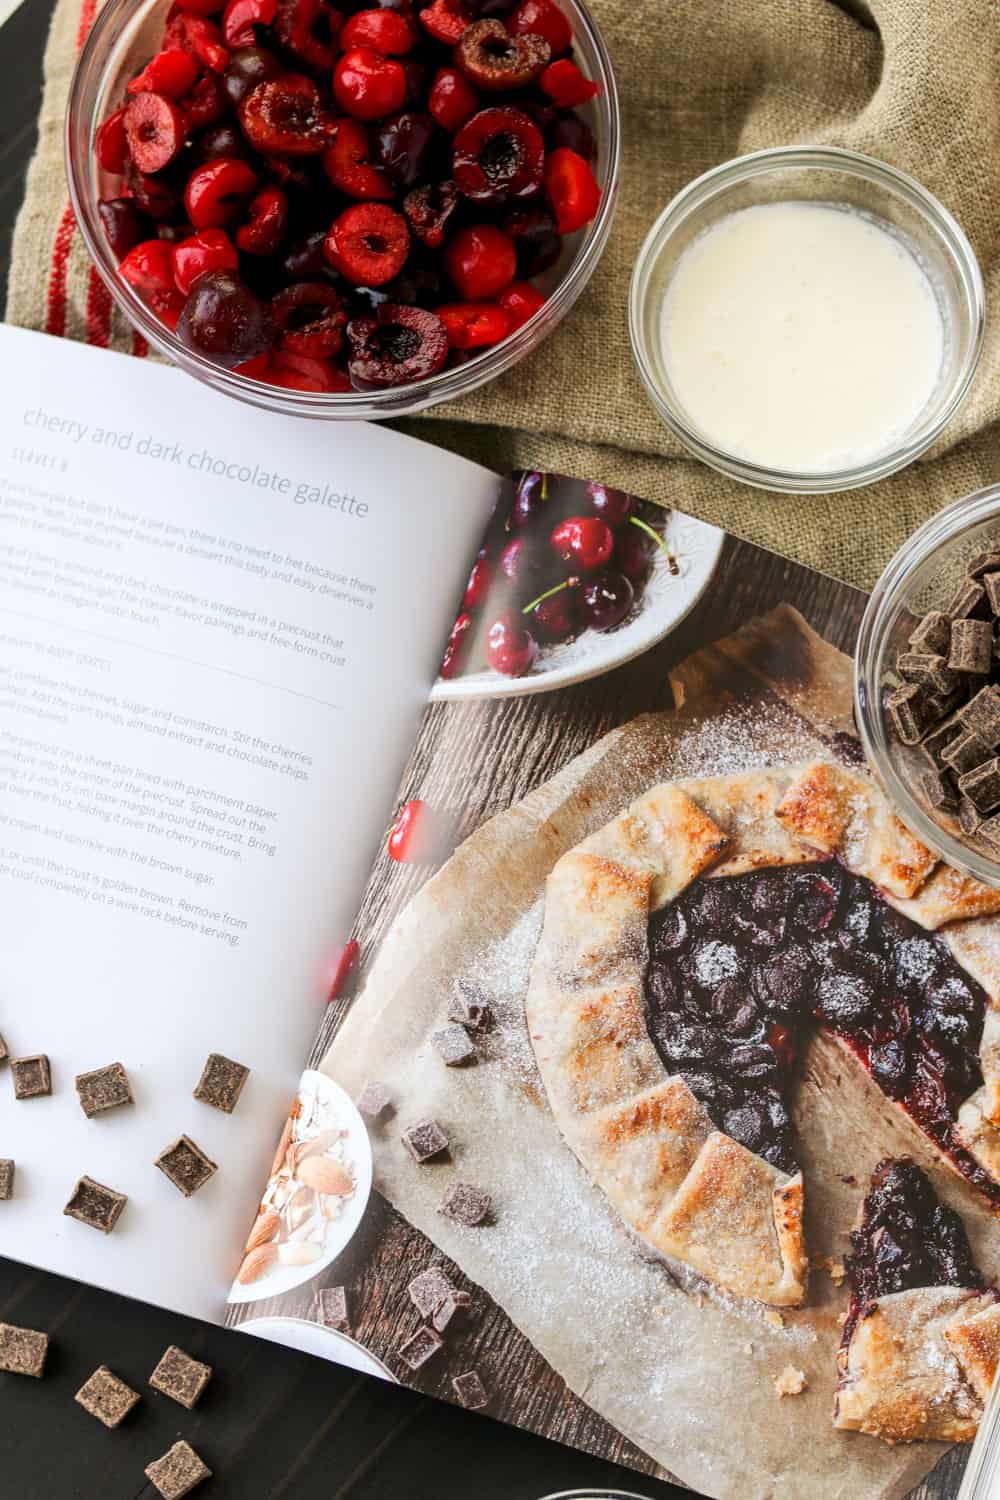 Making a galette with cherries and dark chocolate.